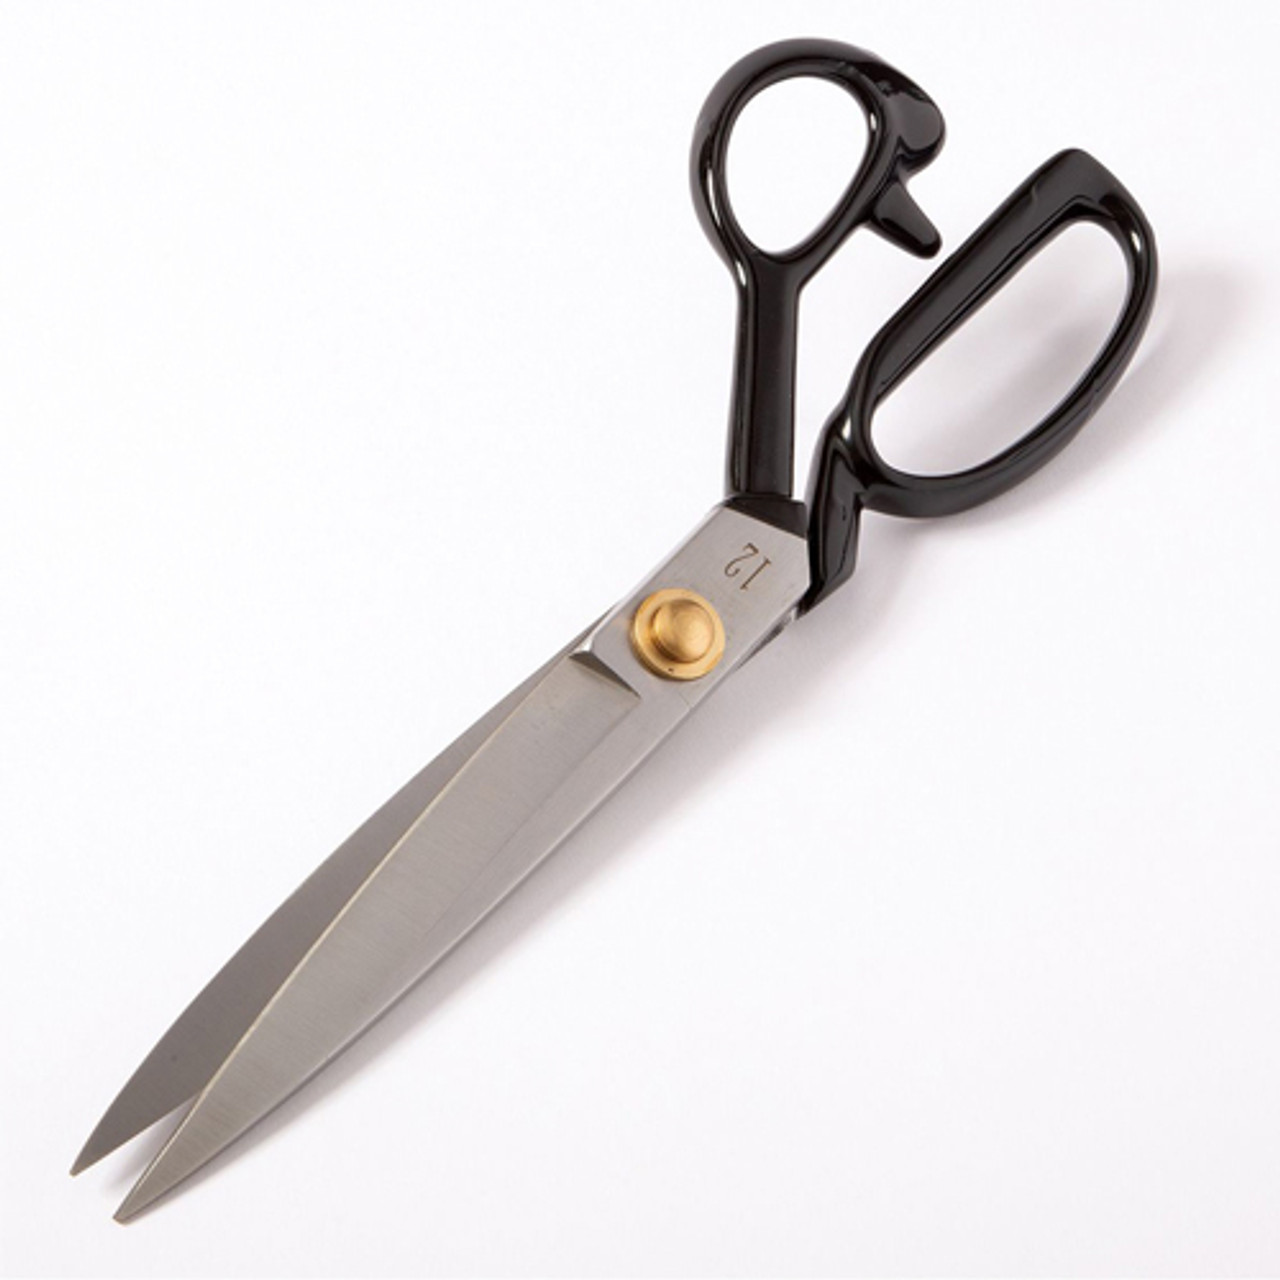 Sullivans SUL-12 Forged Tailoring Shears 12